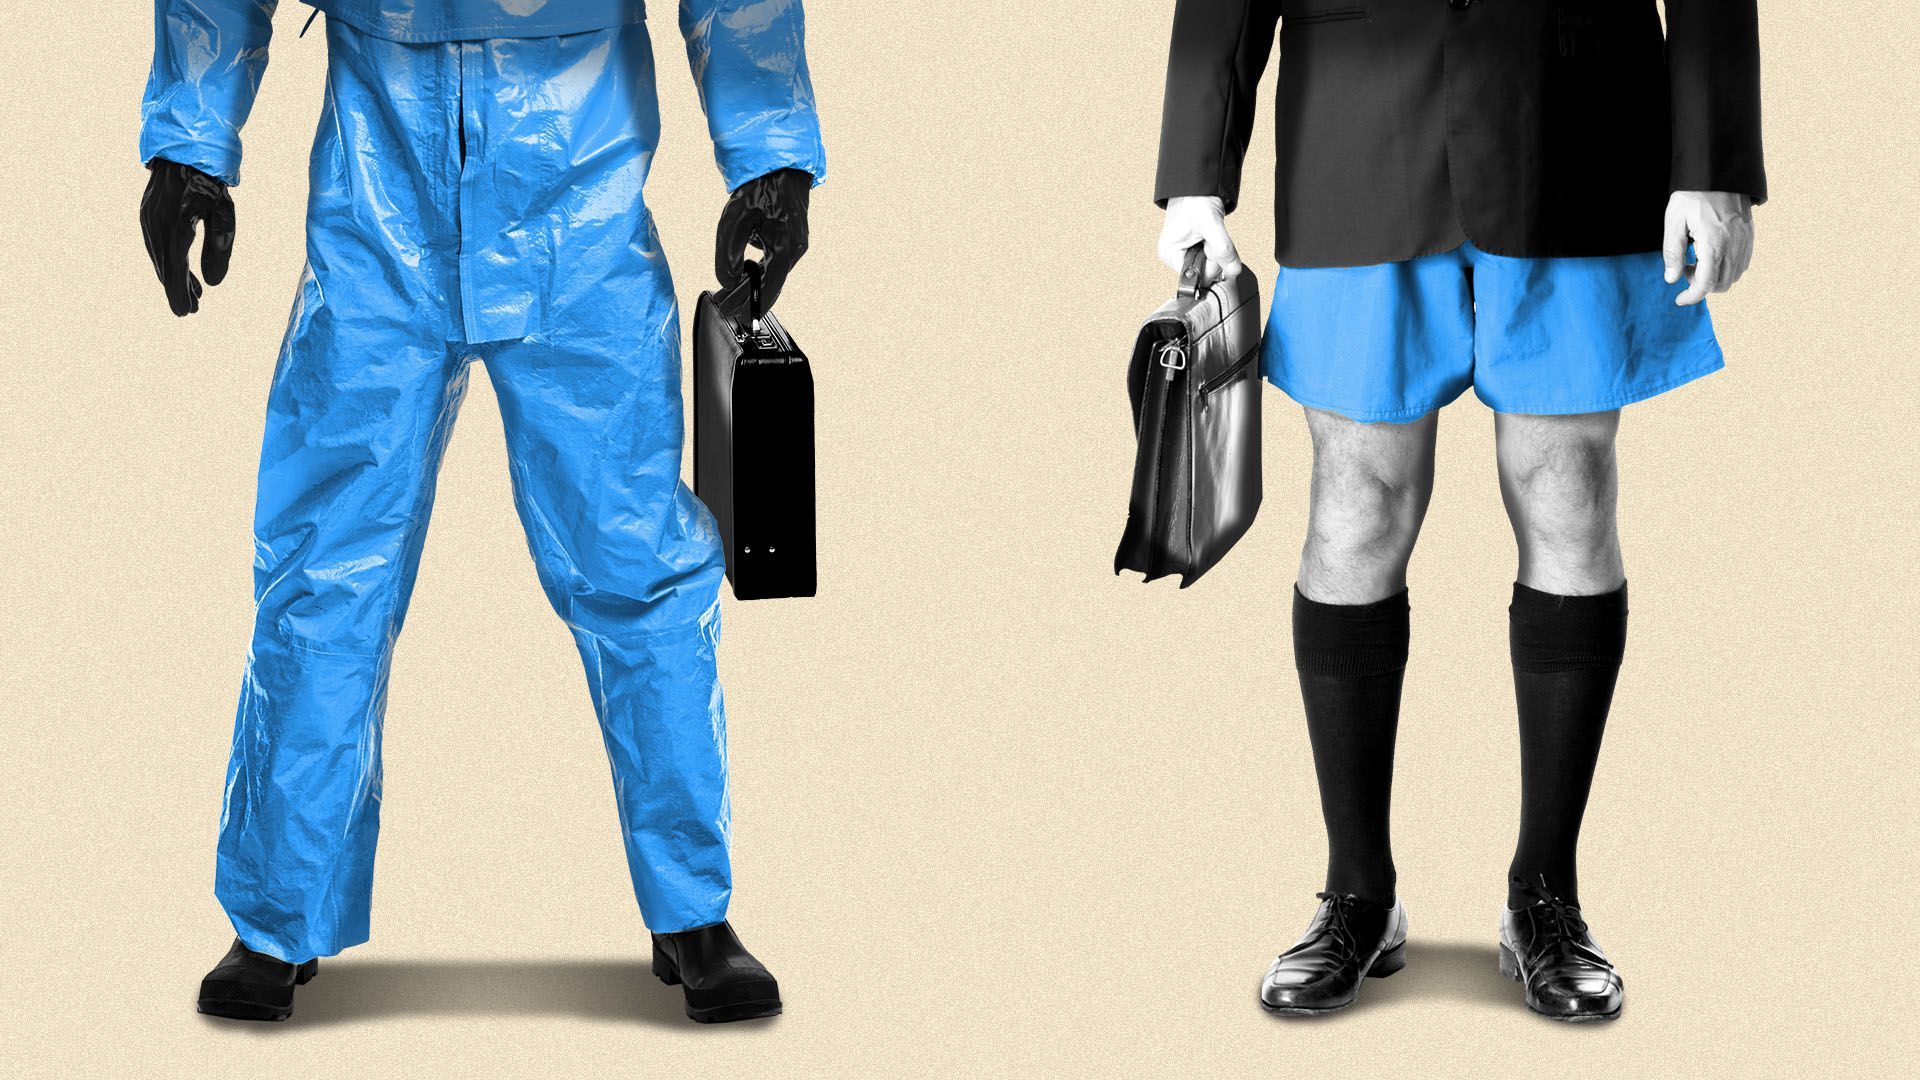 Illustration of a person holding a briefcase in a hazmat suit next to a person holding a briefcase in a suit without pants